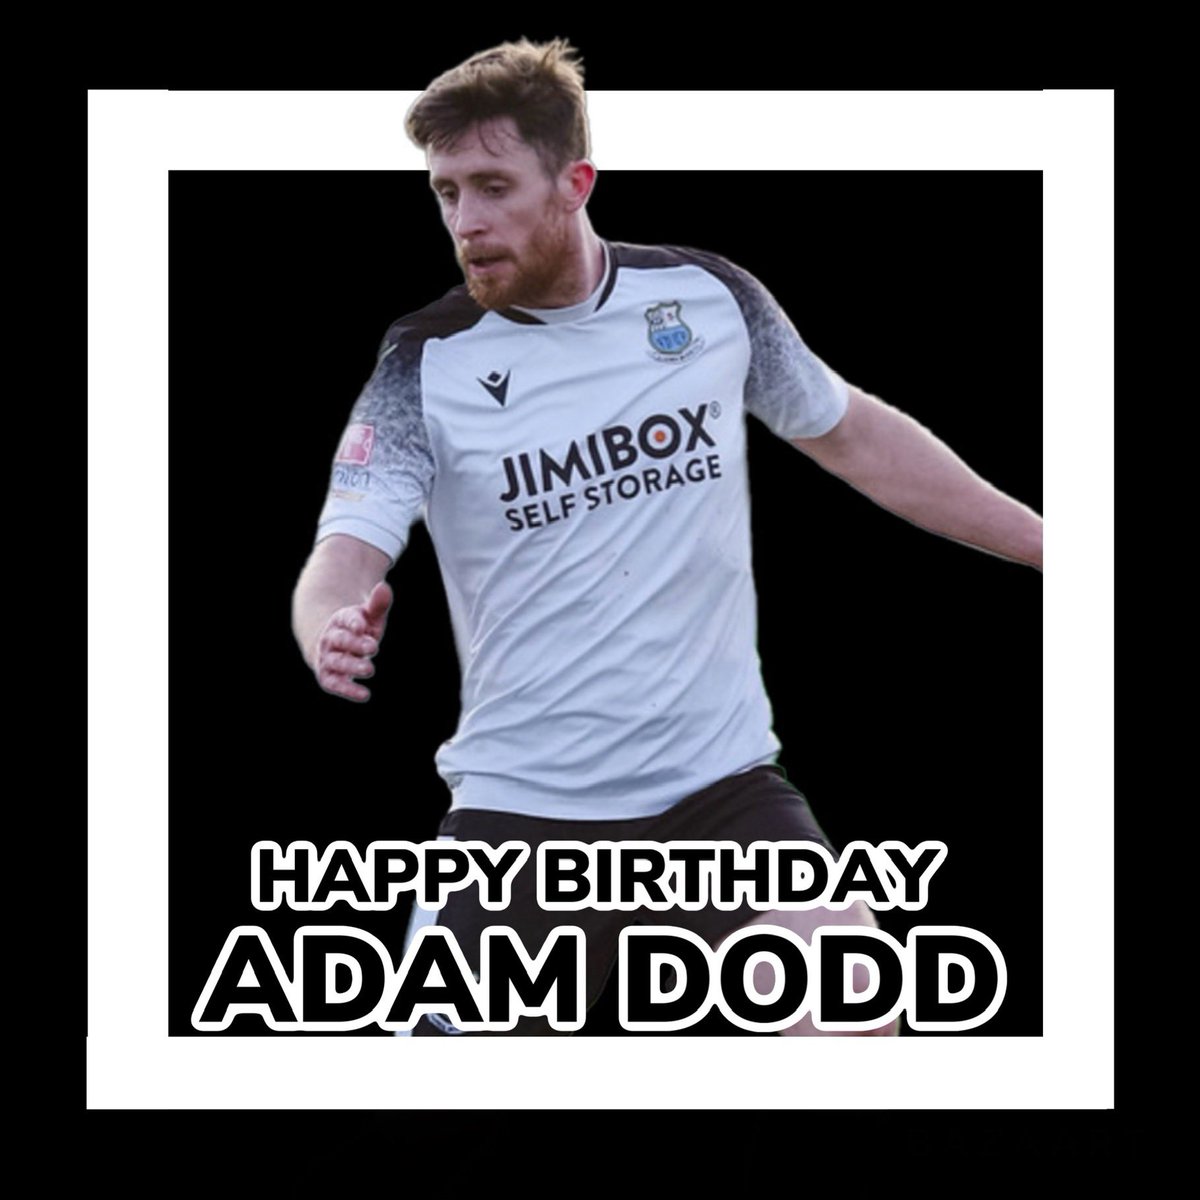 HAPPY BIRTHDAY ADAM DODD Everyone at Bamber Bridge hopes you have a great day! #UpTheBrig